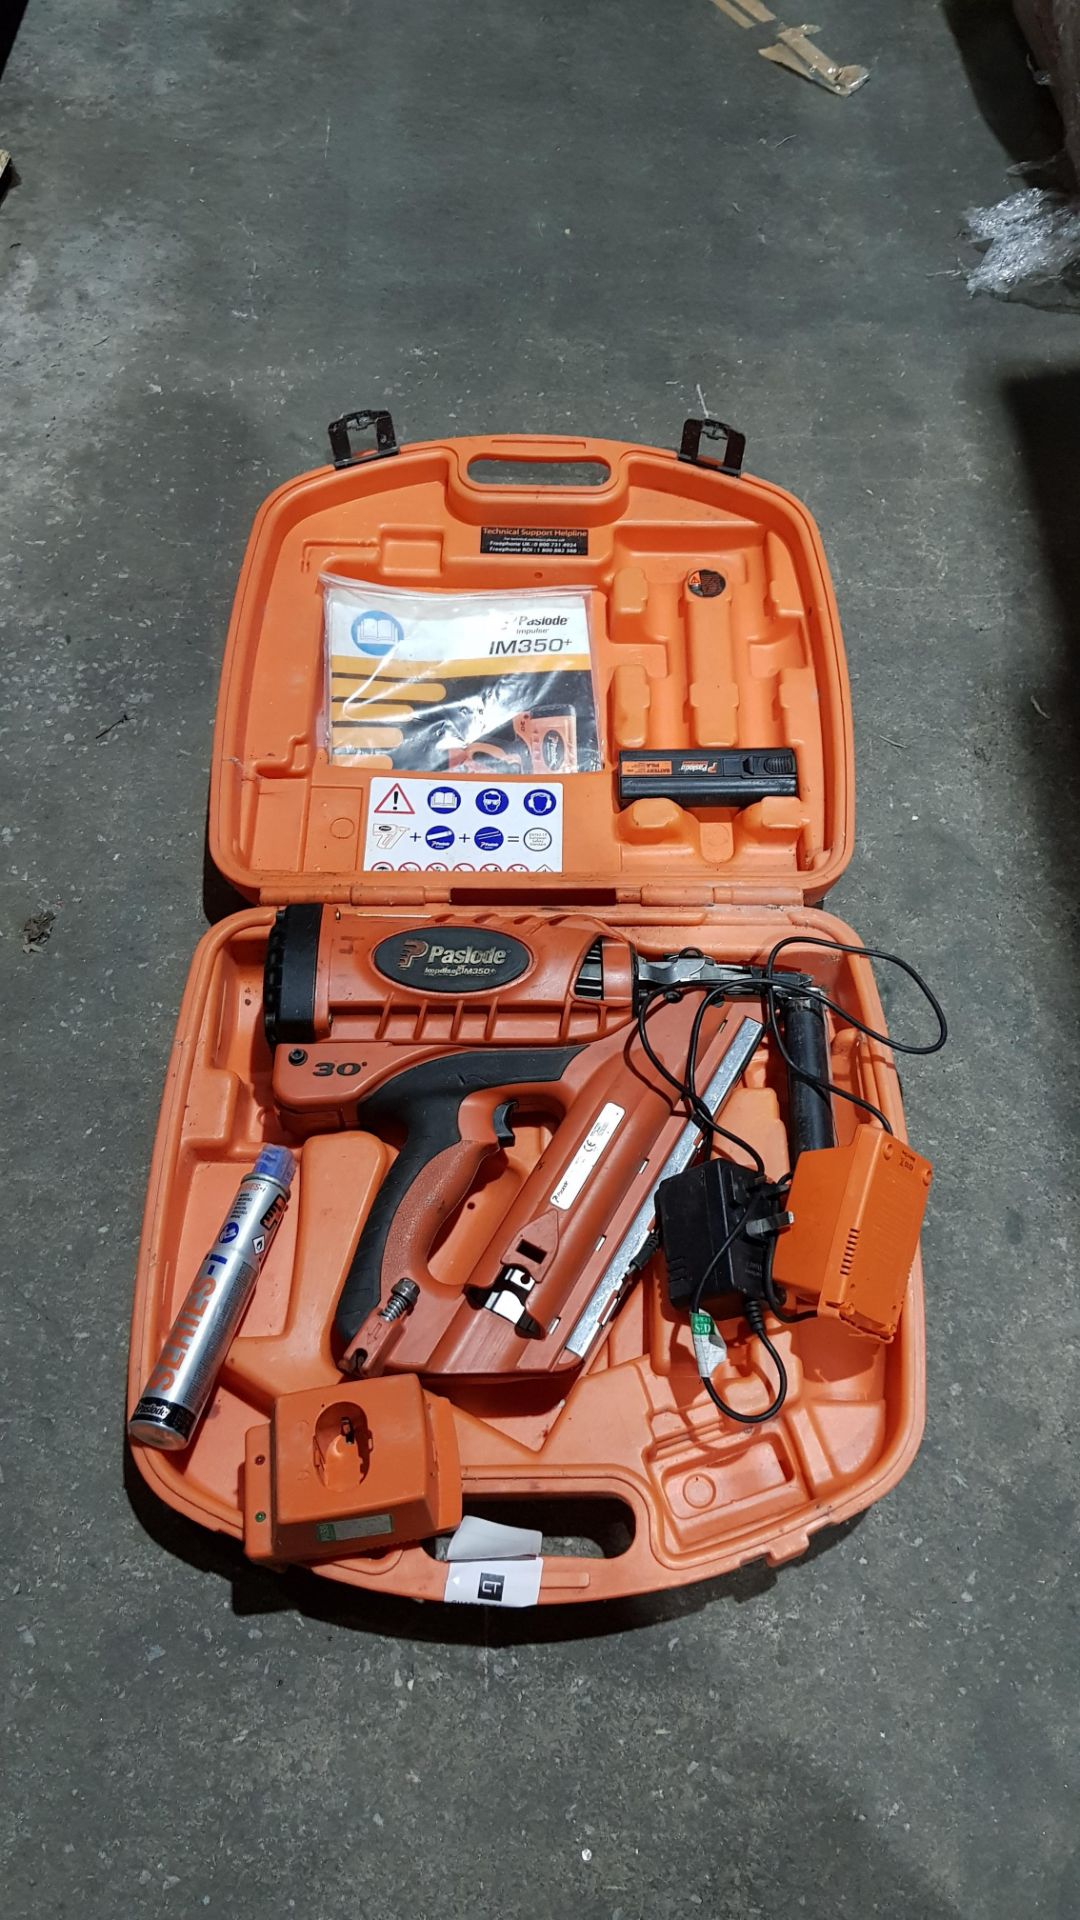 1 X PASLODE IMPLUSE IM360CI LITHIUM NAIL GUN WITH CARRY CASE WITH CHARGER & PASLODE GAS CANISTER